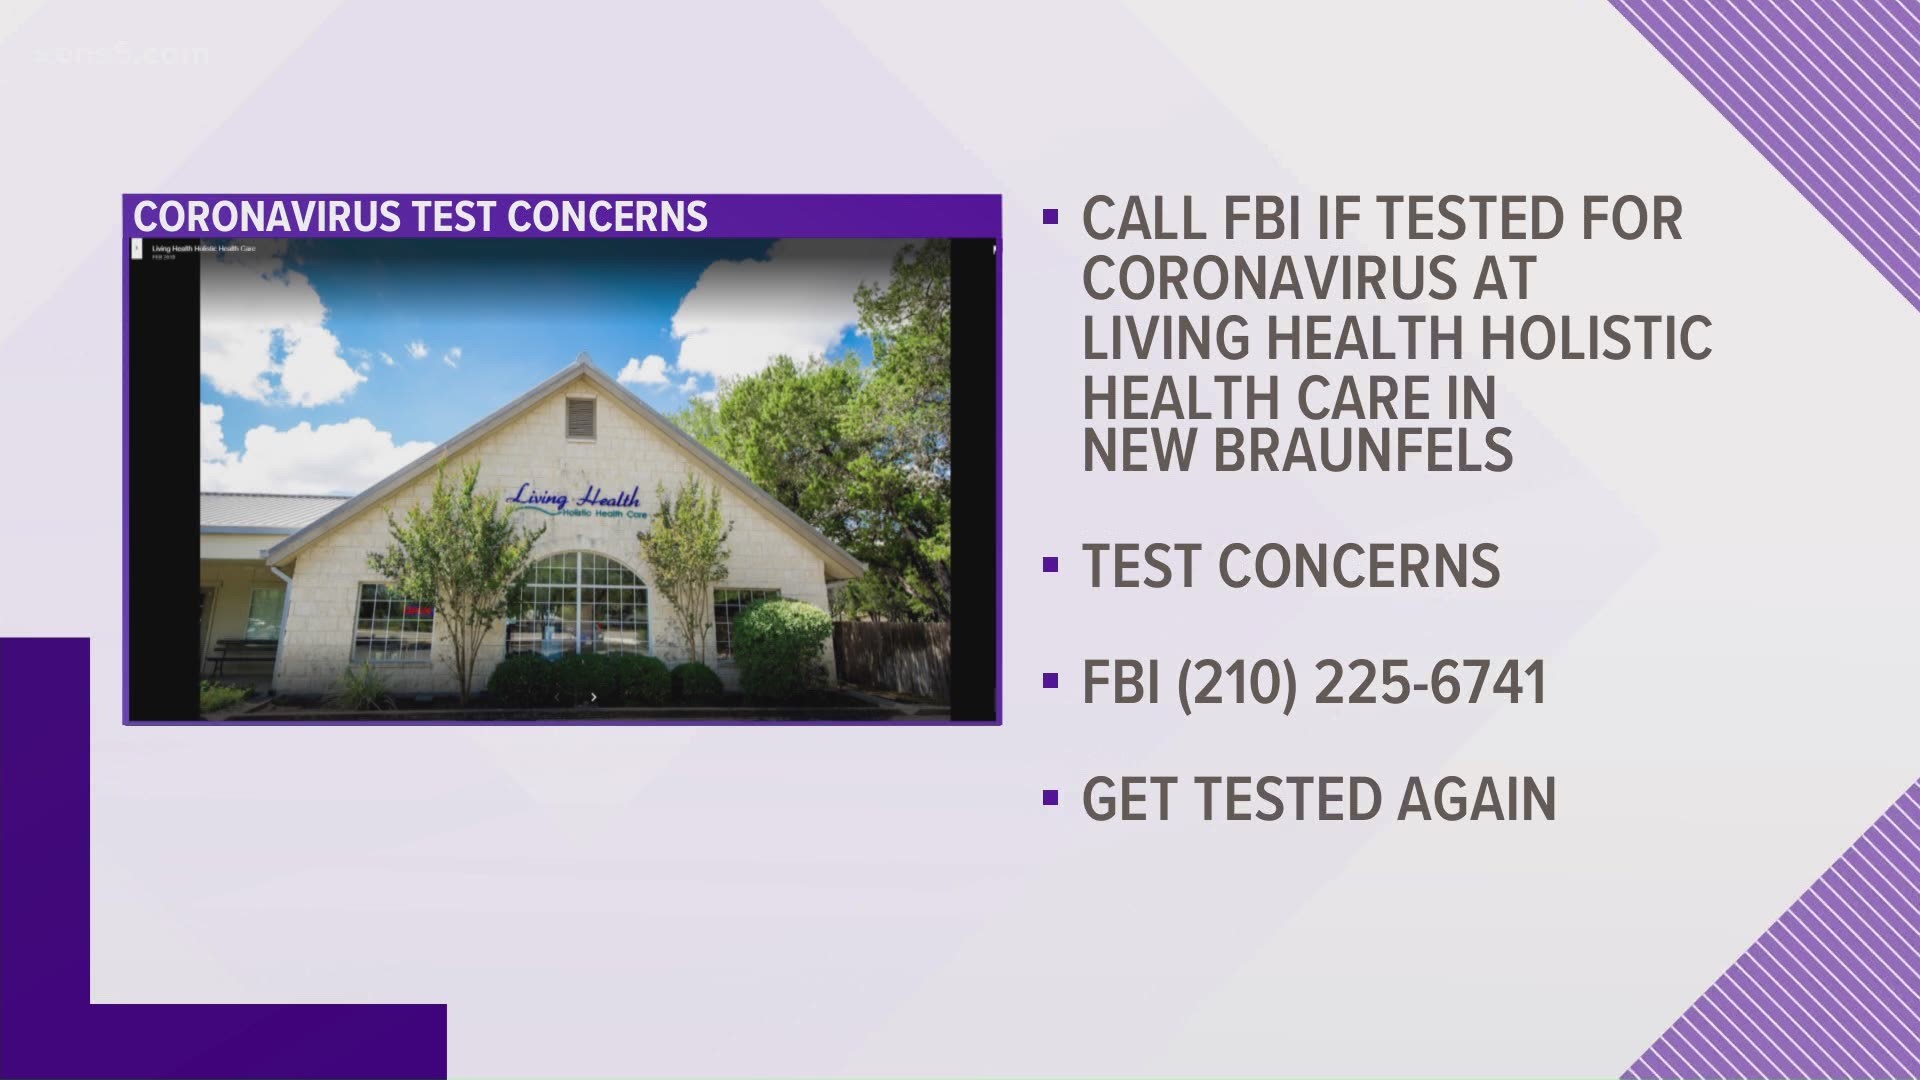 Authorities say the concern stems from one holistic health practice in south Texas, and is asking that anyone who was tested there contact them.